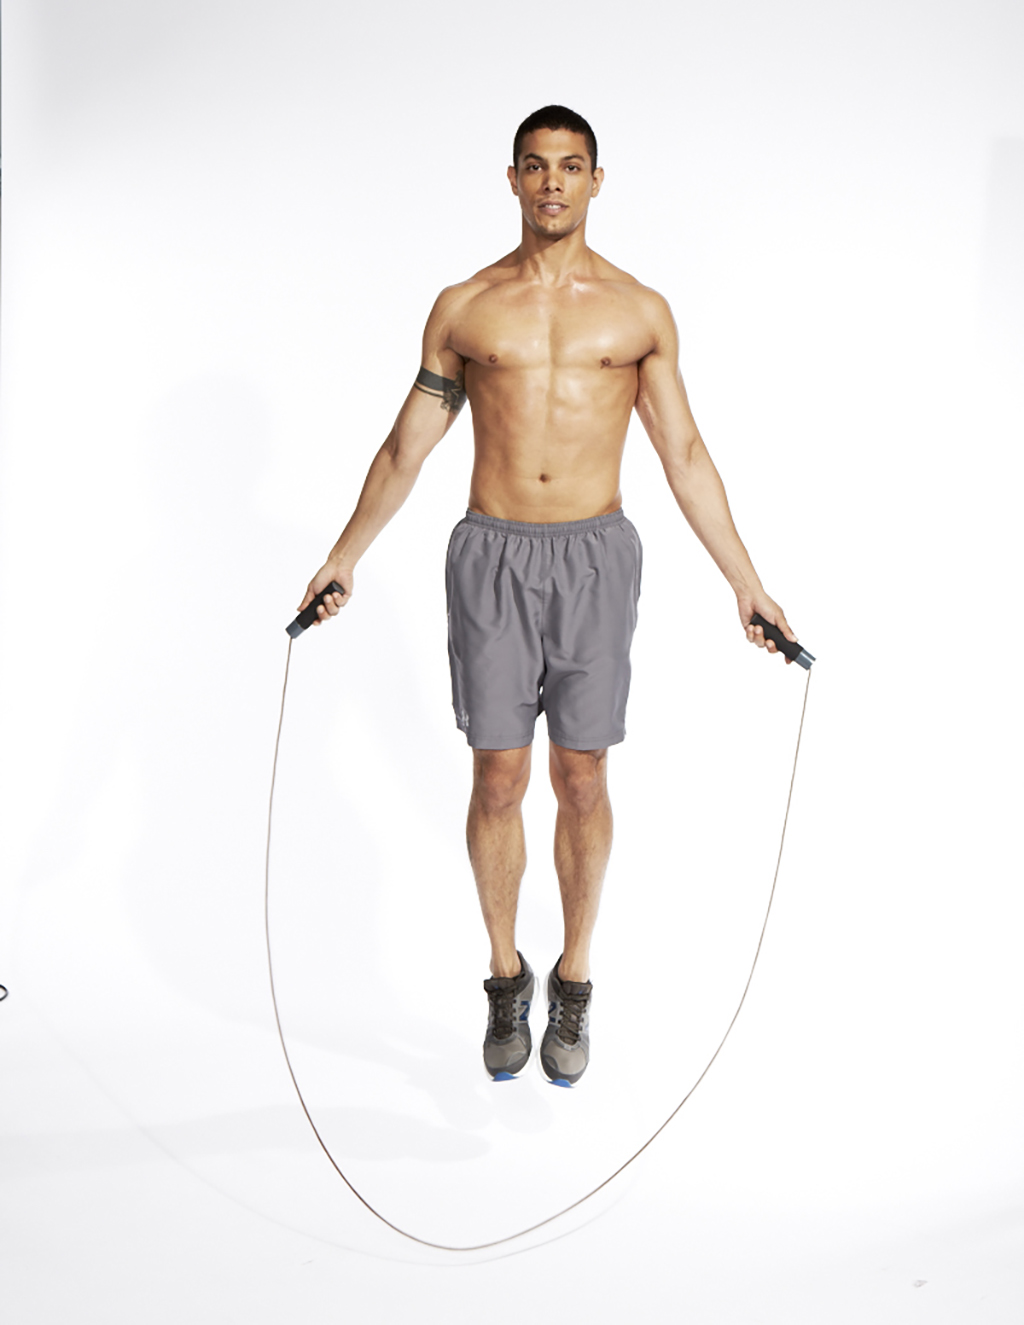 Guy jumping rope, part of a great MMA training routine. 